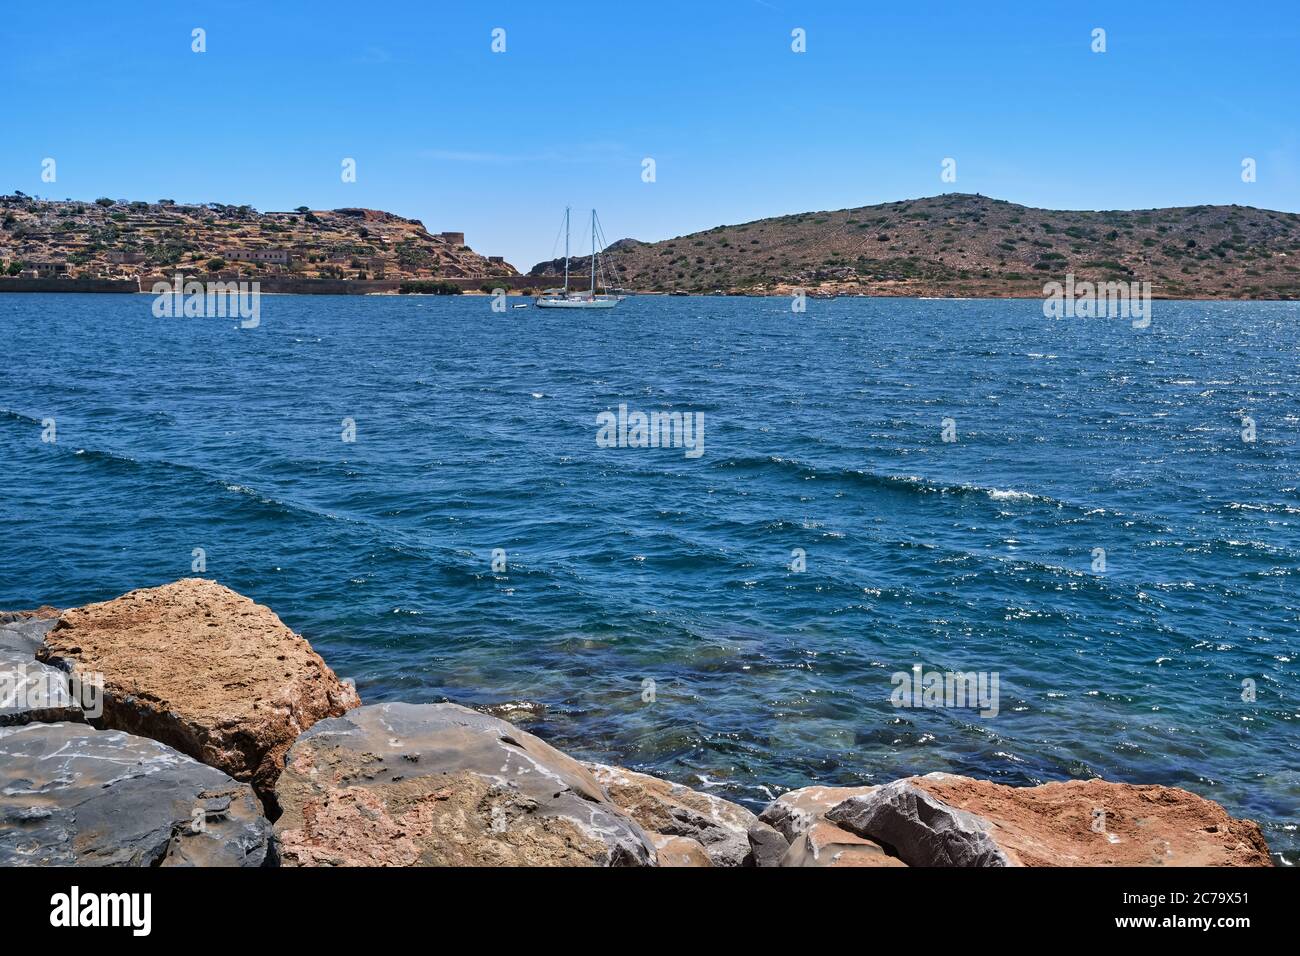 View of Spinalonga island lagoon and Venetian fortress with anchored yacht and breakwater stones in foreground, Crete, Greece Stock Photo